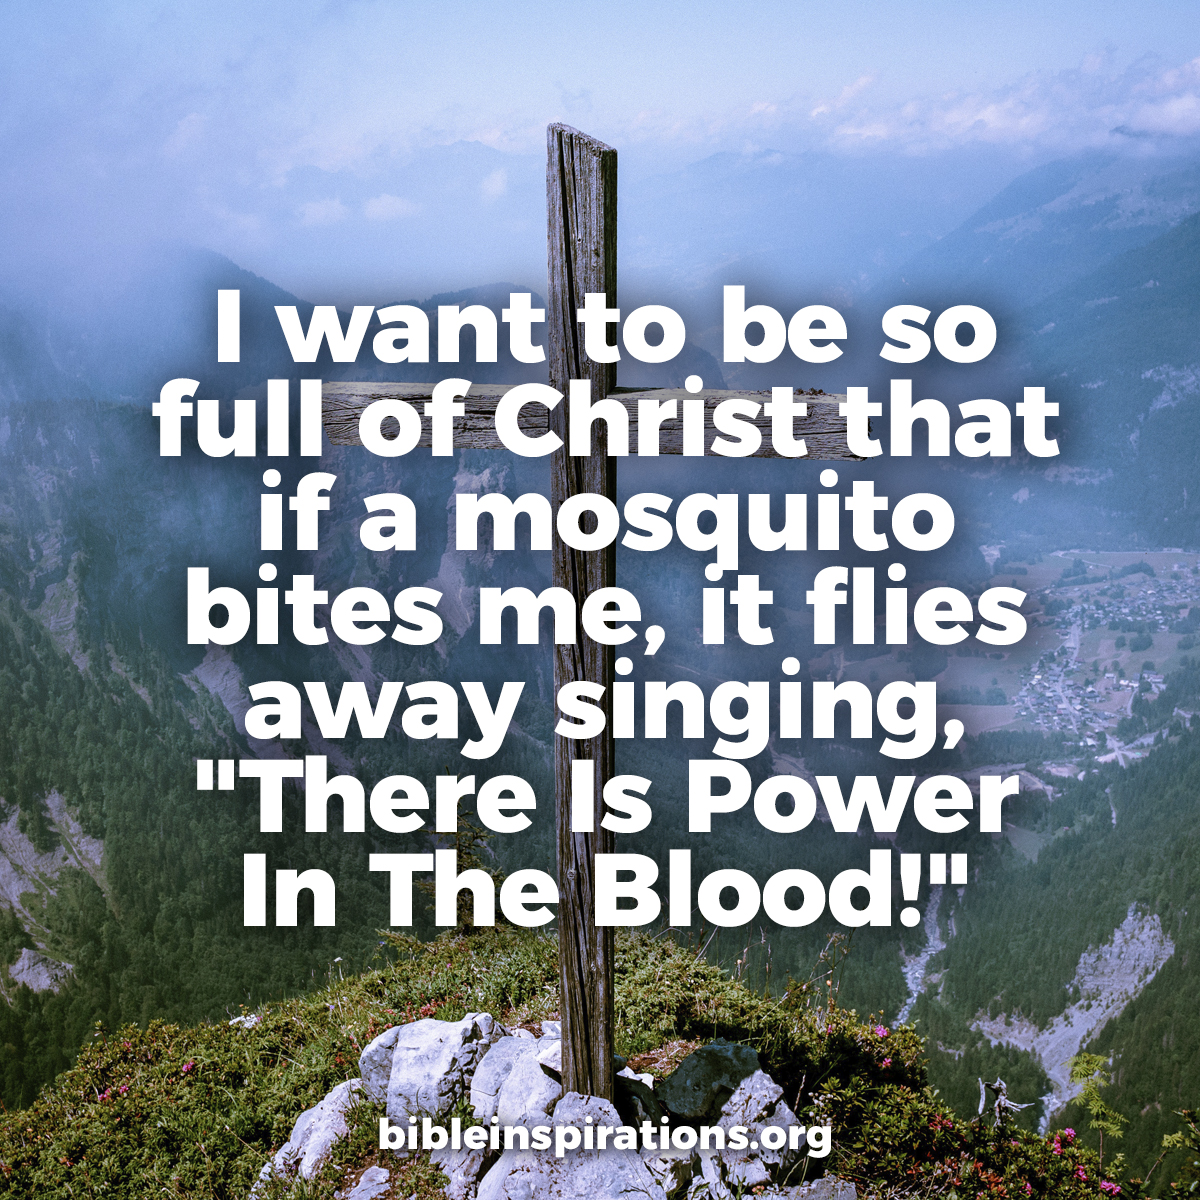 I want to be so full of Christ, that when a mosquito bites me, he flies away singing There Is Power In The Blood